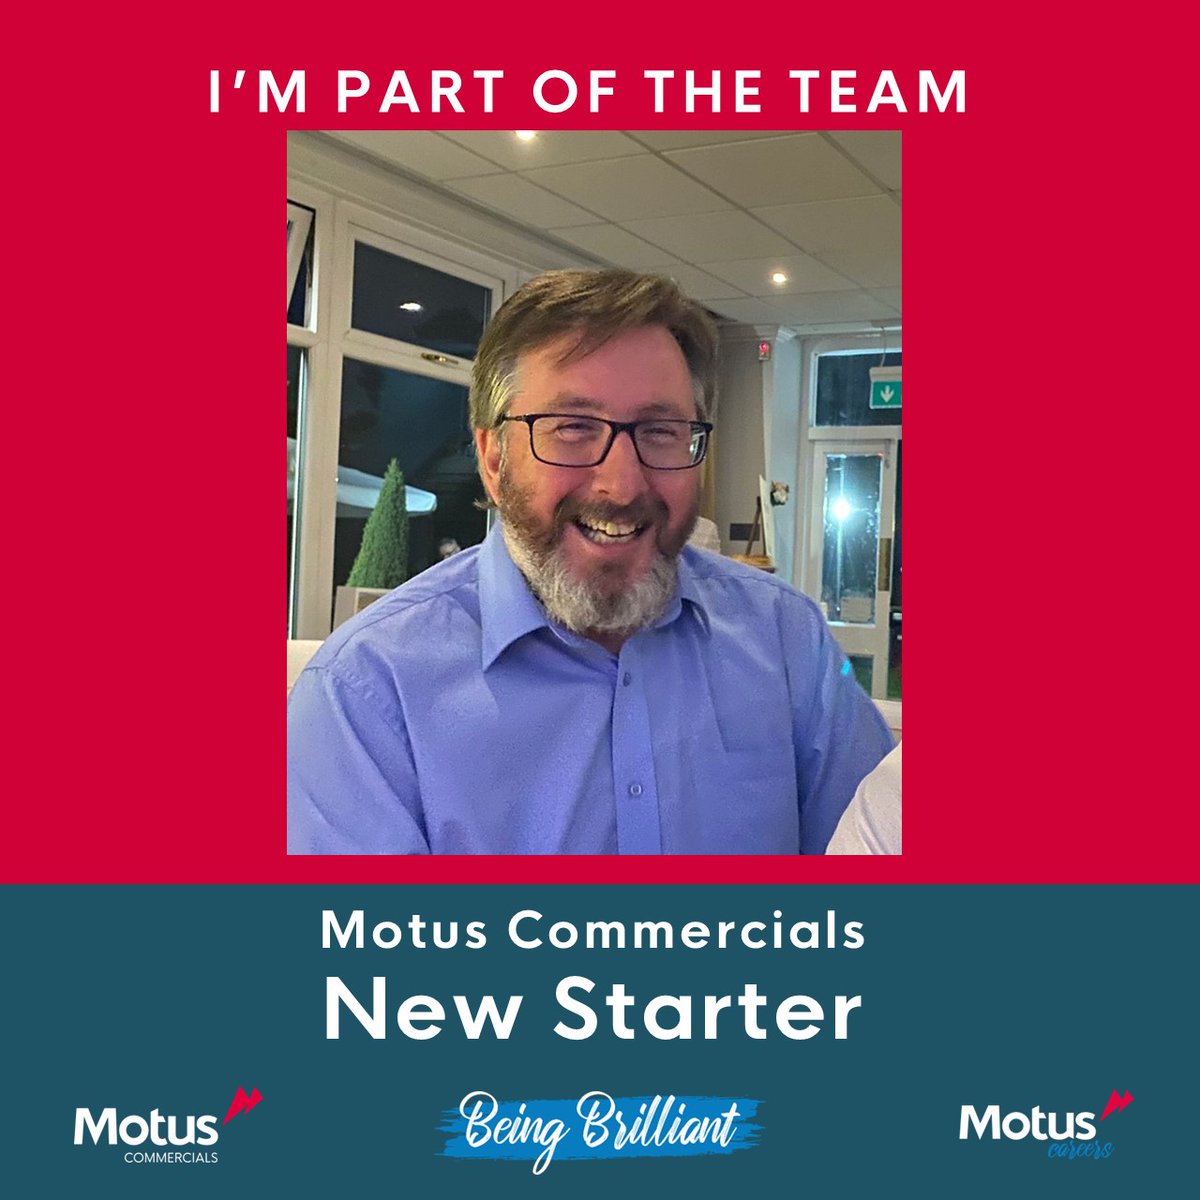 Here’s our new Parts Driver at Motus Commercials Halesowen, Stuart Pinson!

We’re so glad to have you on the team! 🤩

Explore opportunities here➡️ loom.ly/YLUW7uk

#MondayMotivation #NewStarter #Halesowen #Parts #JoinTheTeam #TeamMotus #MotusCommercialsCareers